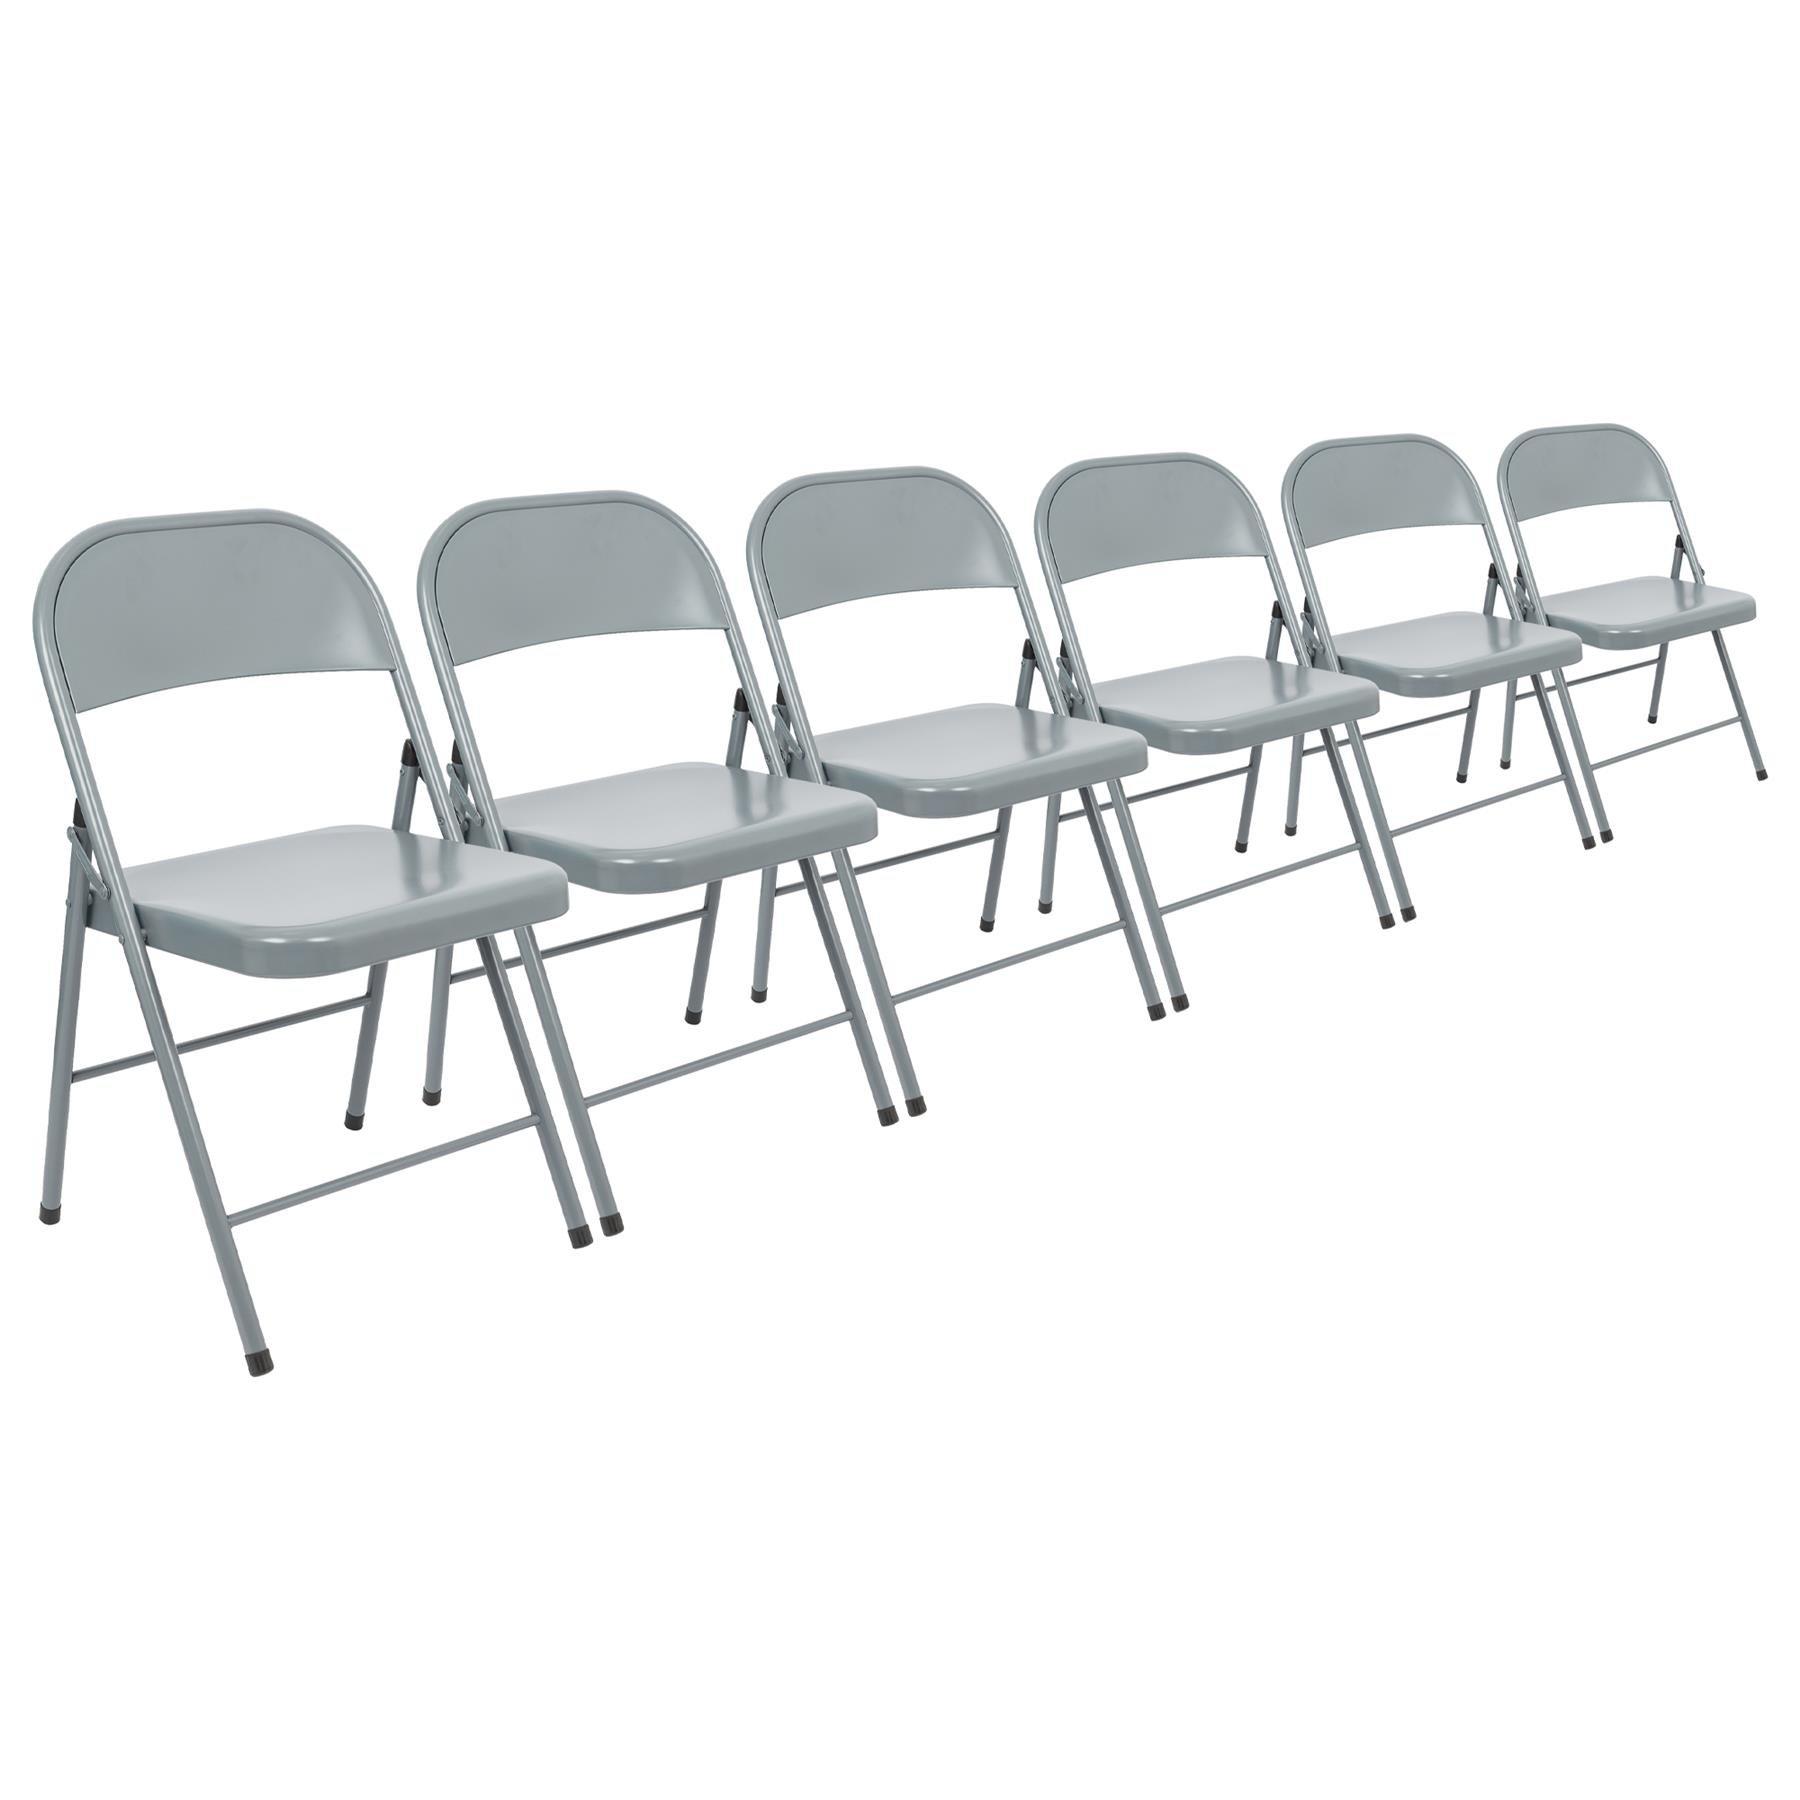 Metal Folding Chair - Pack of 6